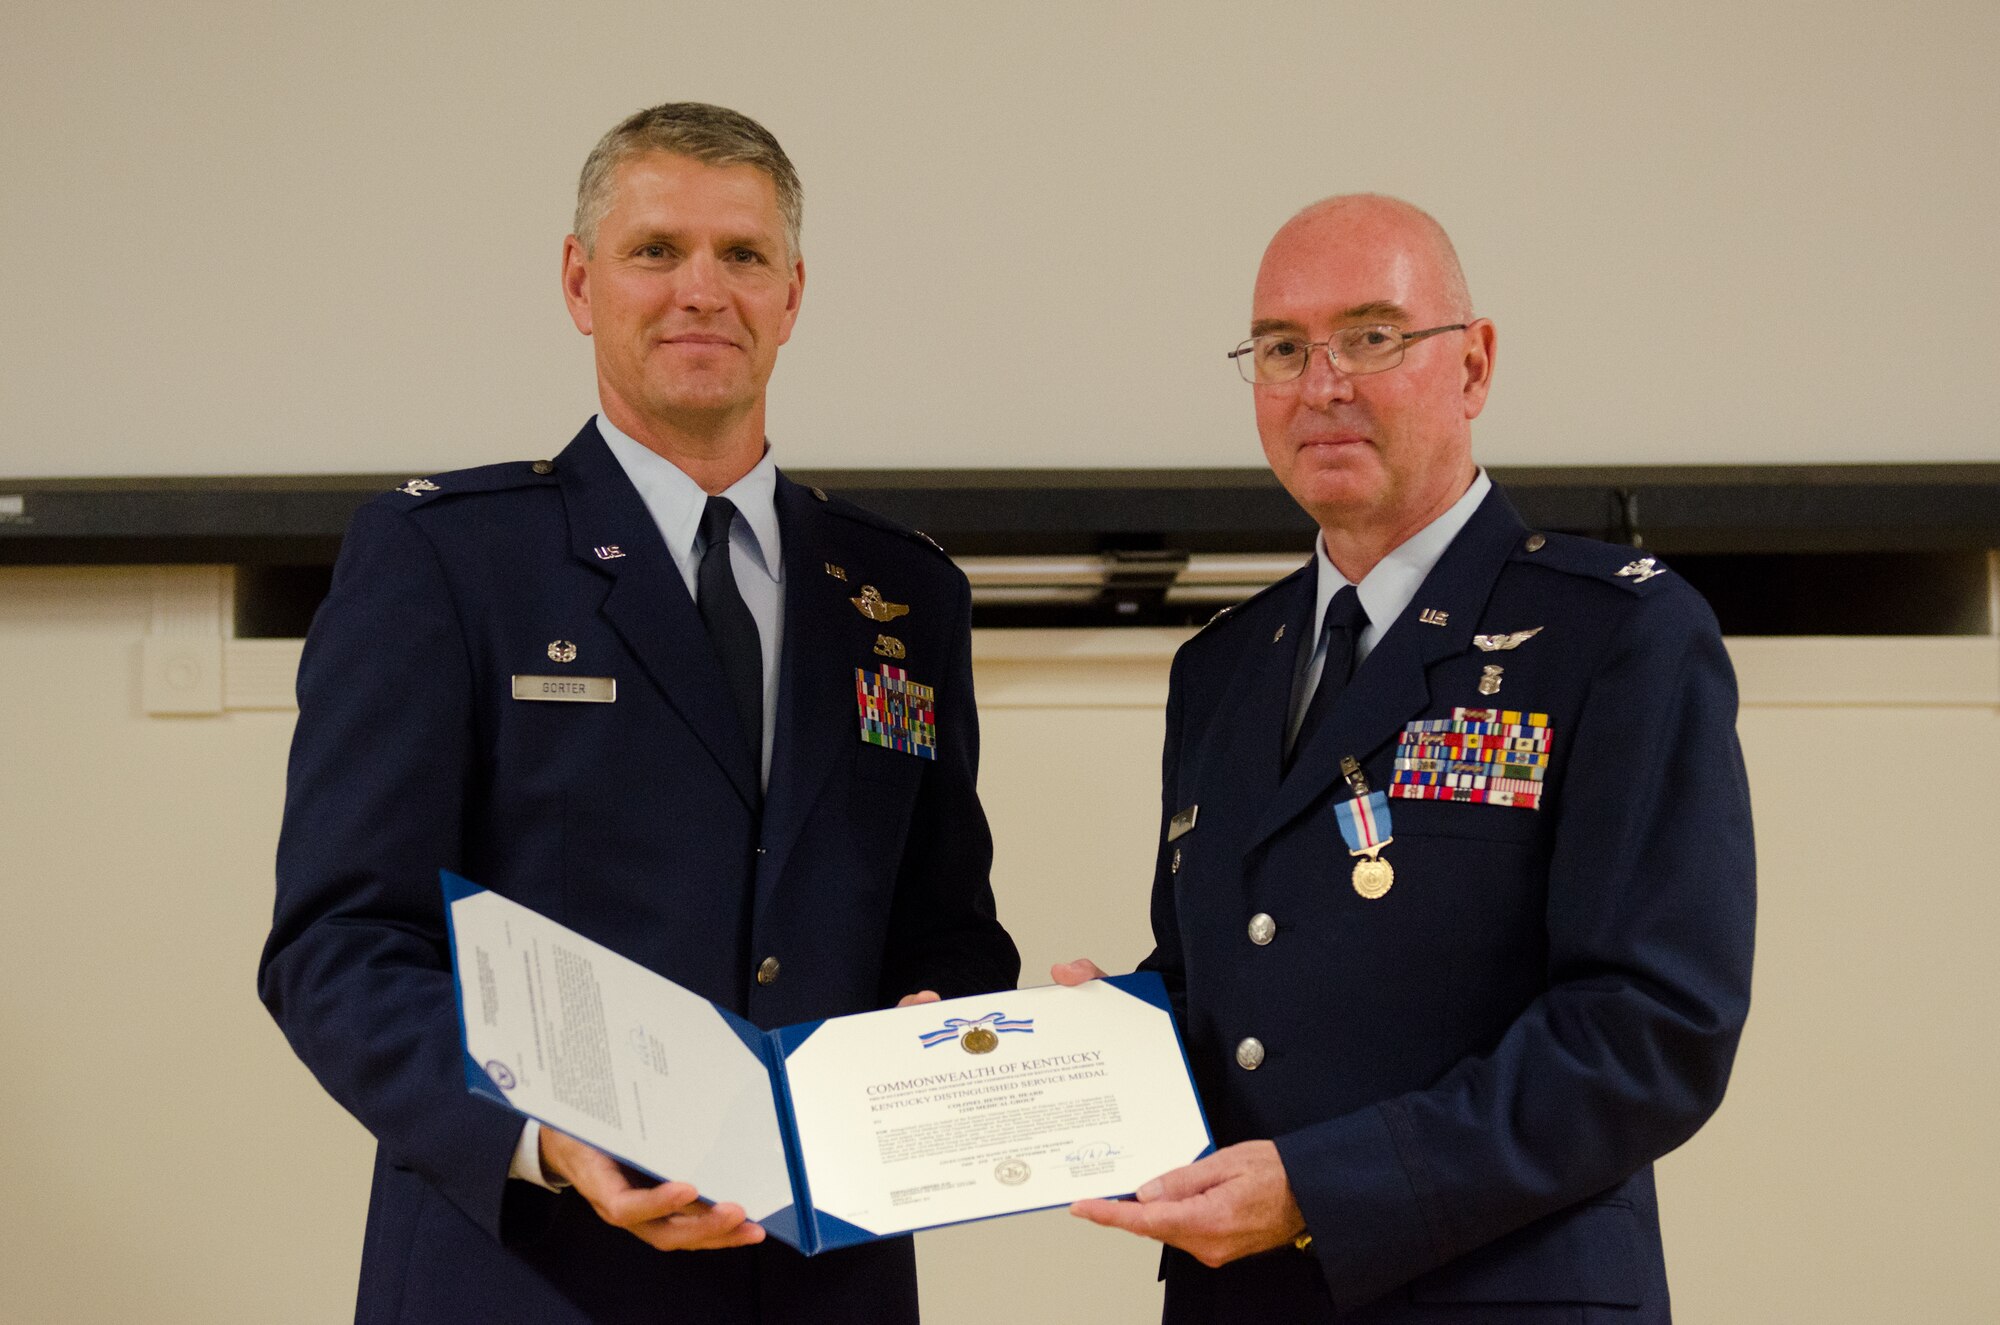 Col. Henry Heard (right), the outgoing commander of the 123rd Medical Group, receives the Kentucky Distinguished Service Medal from Col. Barry Gorter, commander of the 123rd Airlift Wing, during Heard’s retirement ceremony at the Kentucky Air National Guard Base in Louisville, Ky., Sept. 13, 2014. Heard is retiring after more than two decades of service to the Air Force Reserve and Air National Guard. (U.S. Air National Guard photo by Senior Airman Joshua Horton)